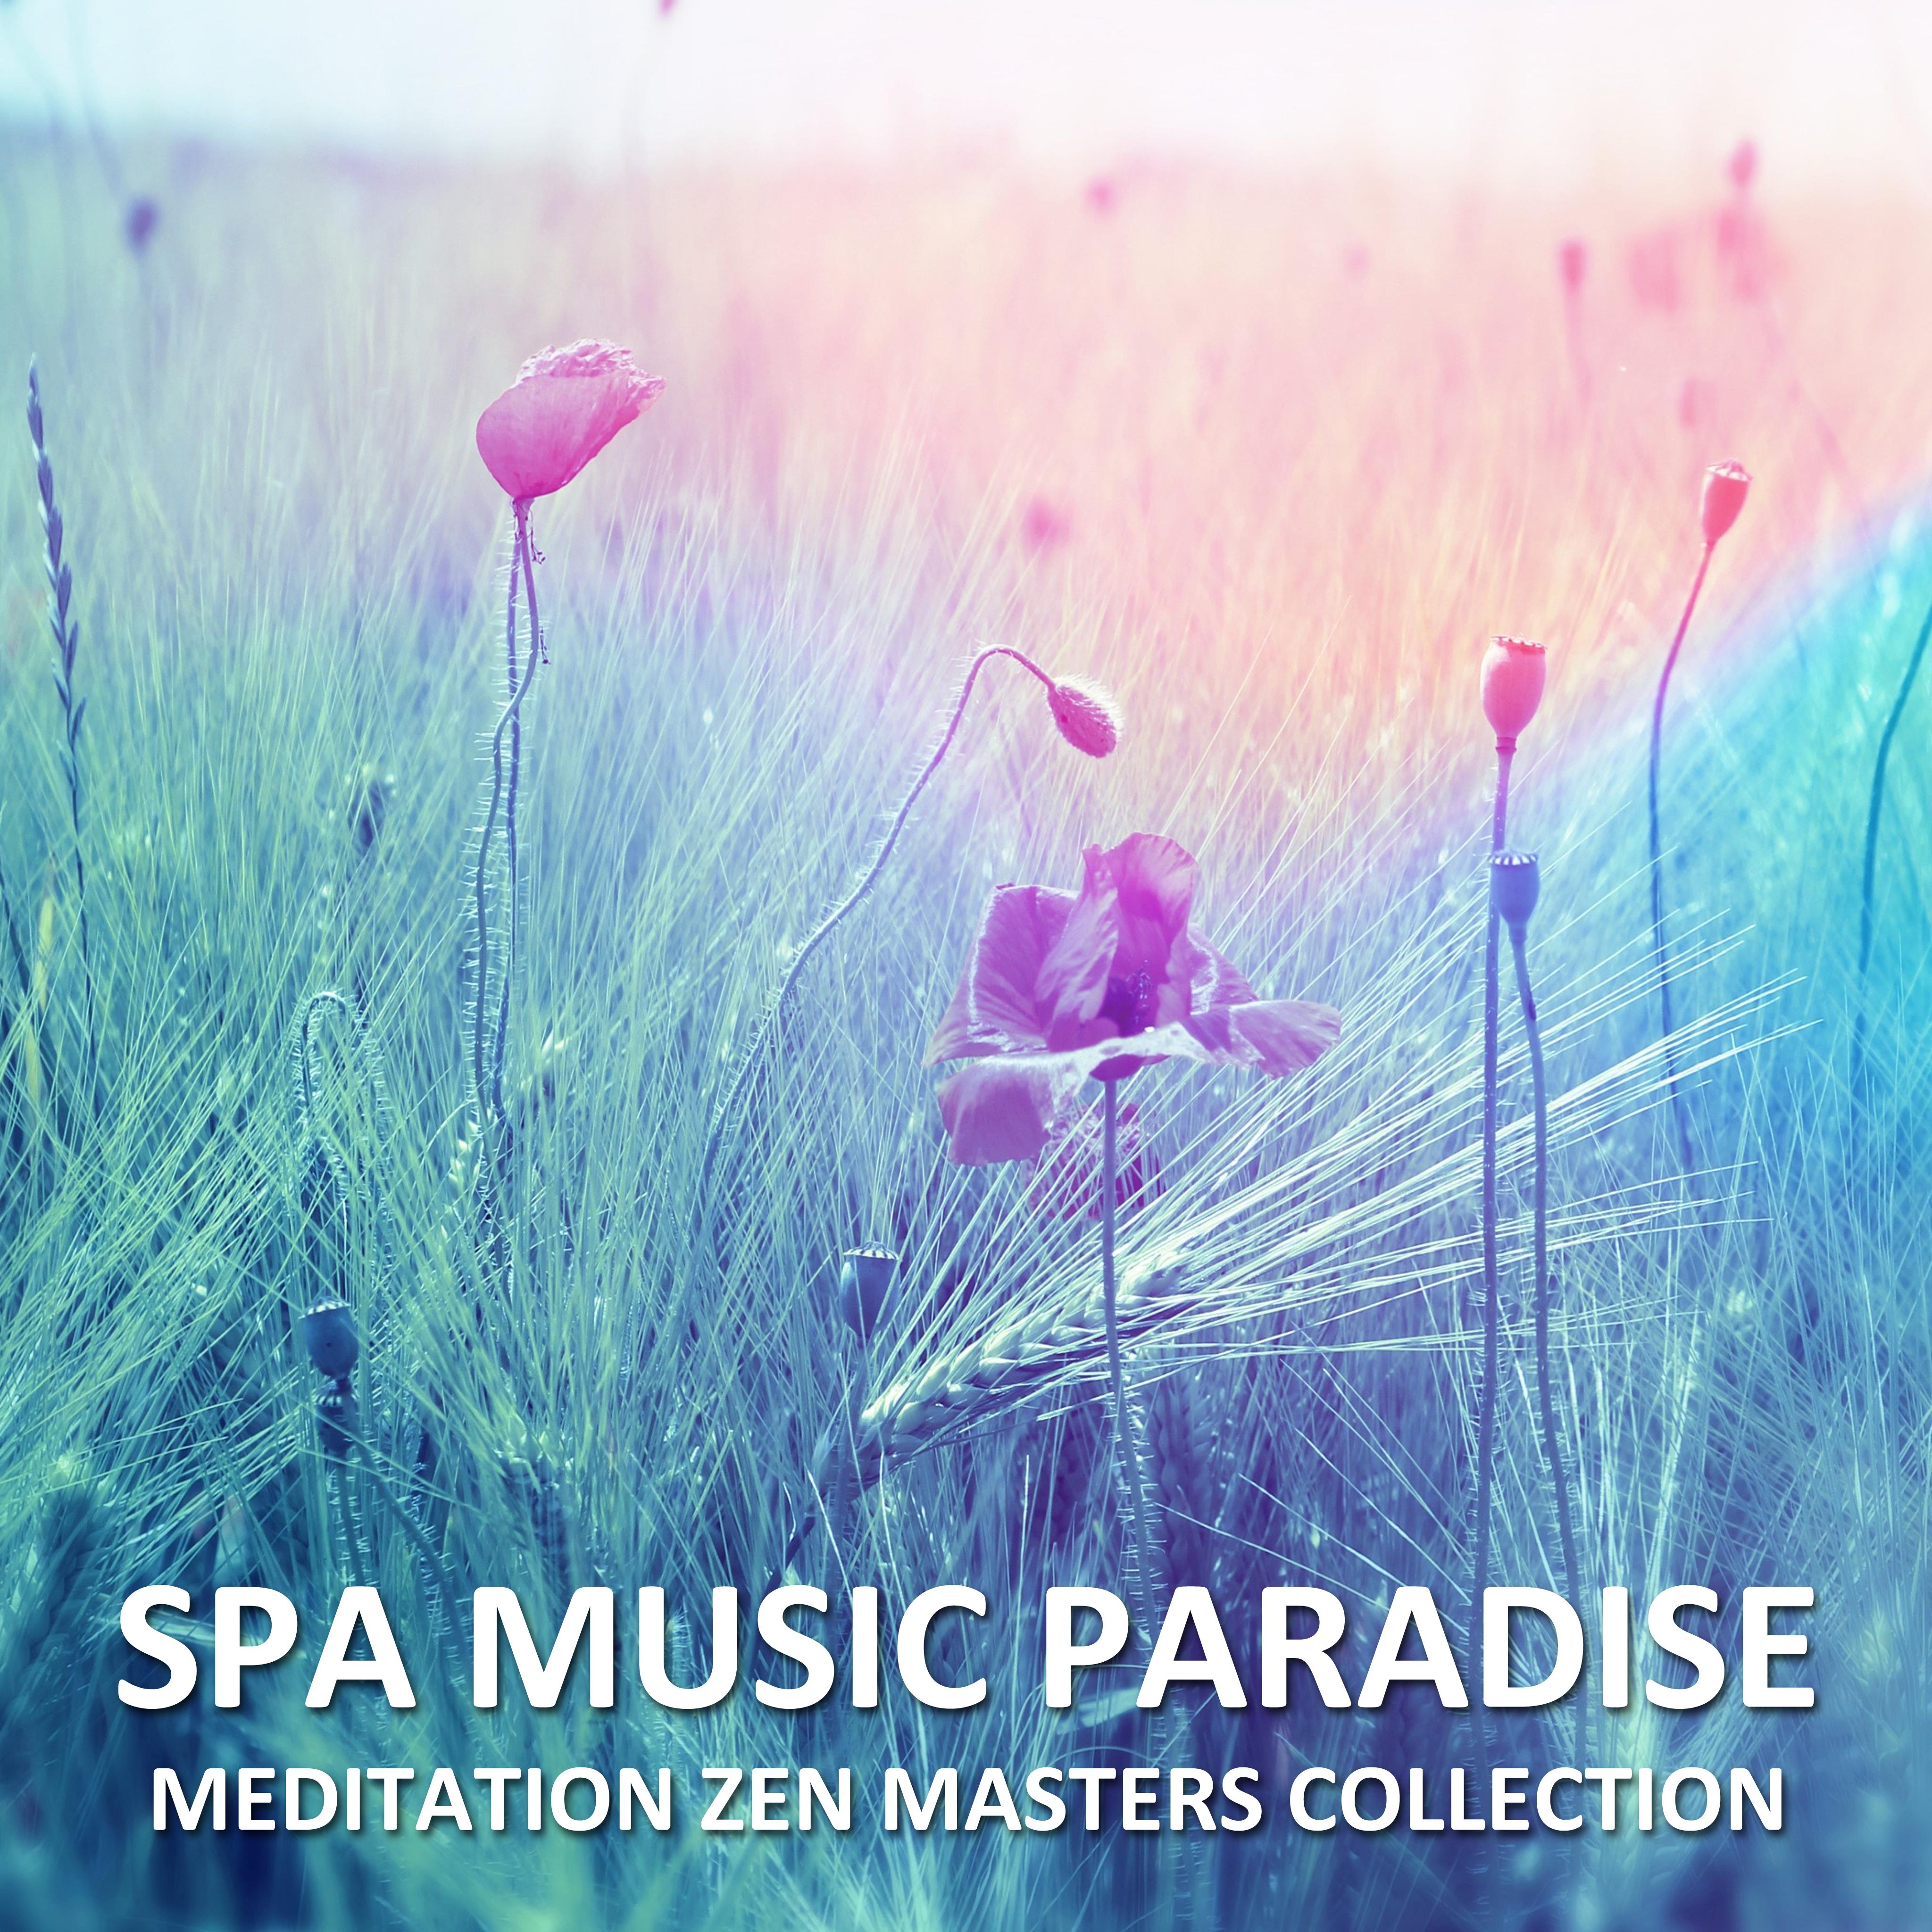 14 Meditaion Zen Masters Collection - Spa Music Paradise